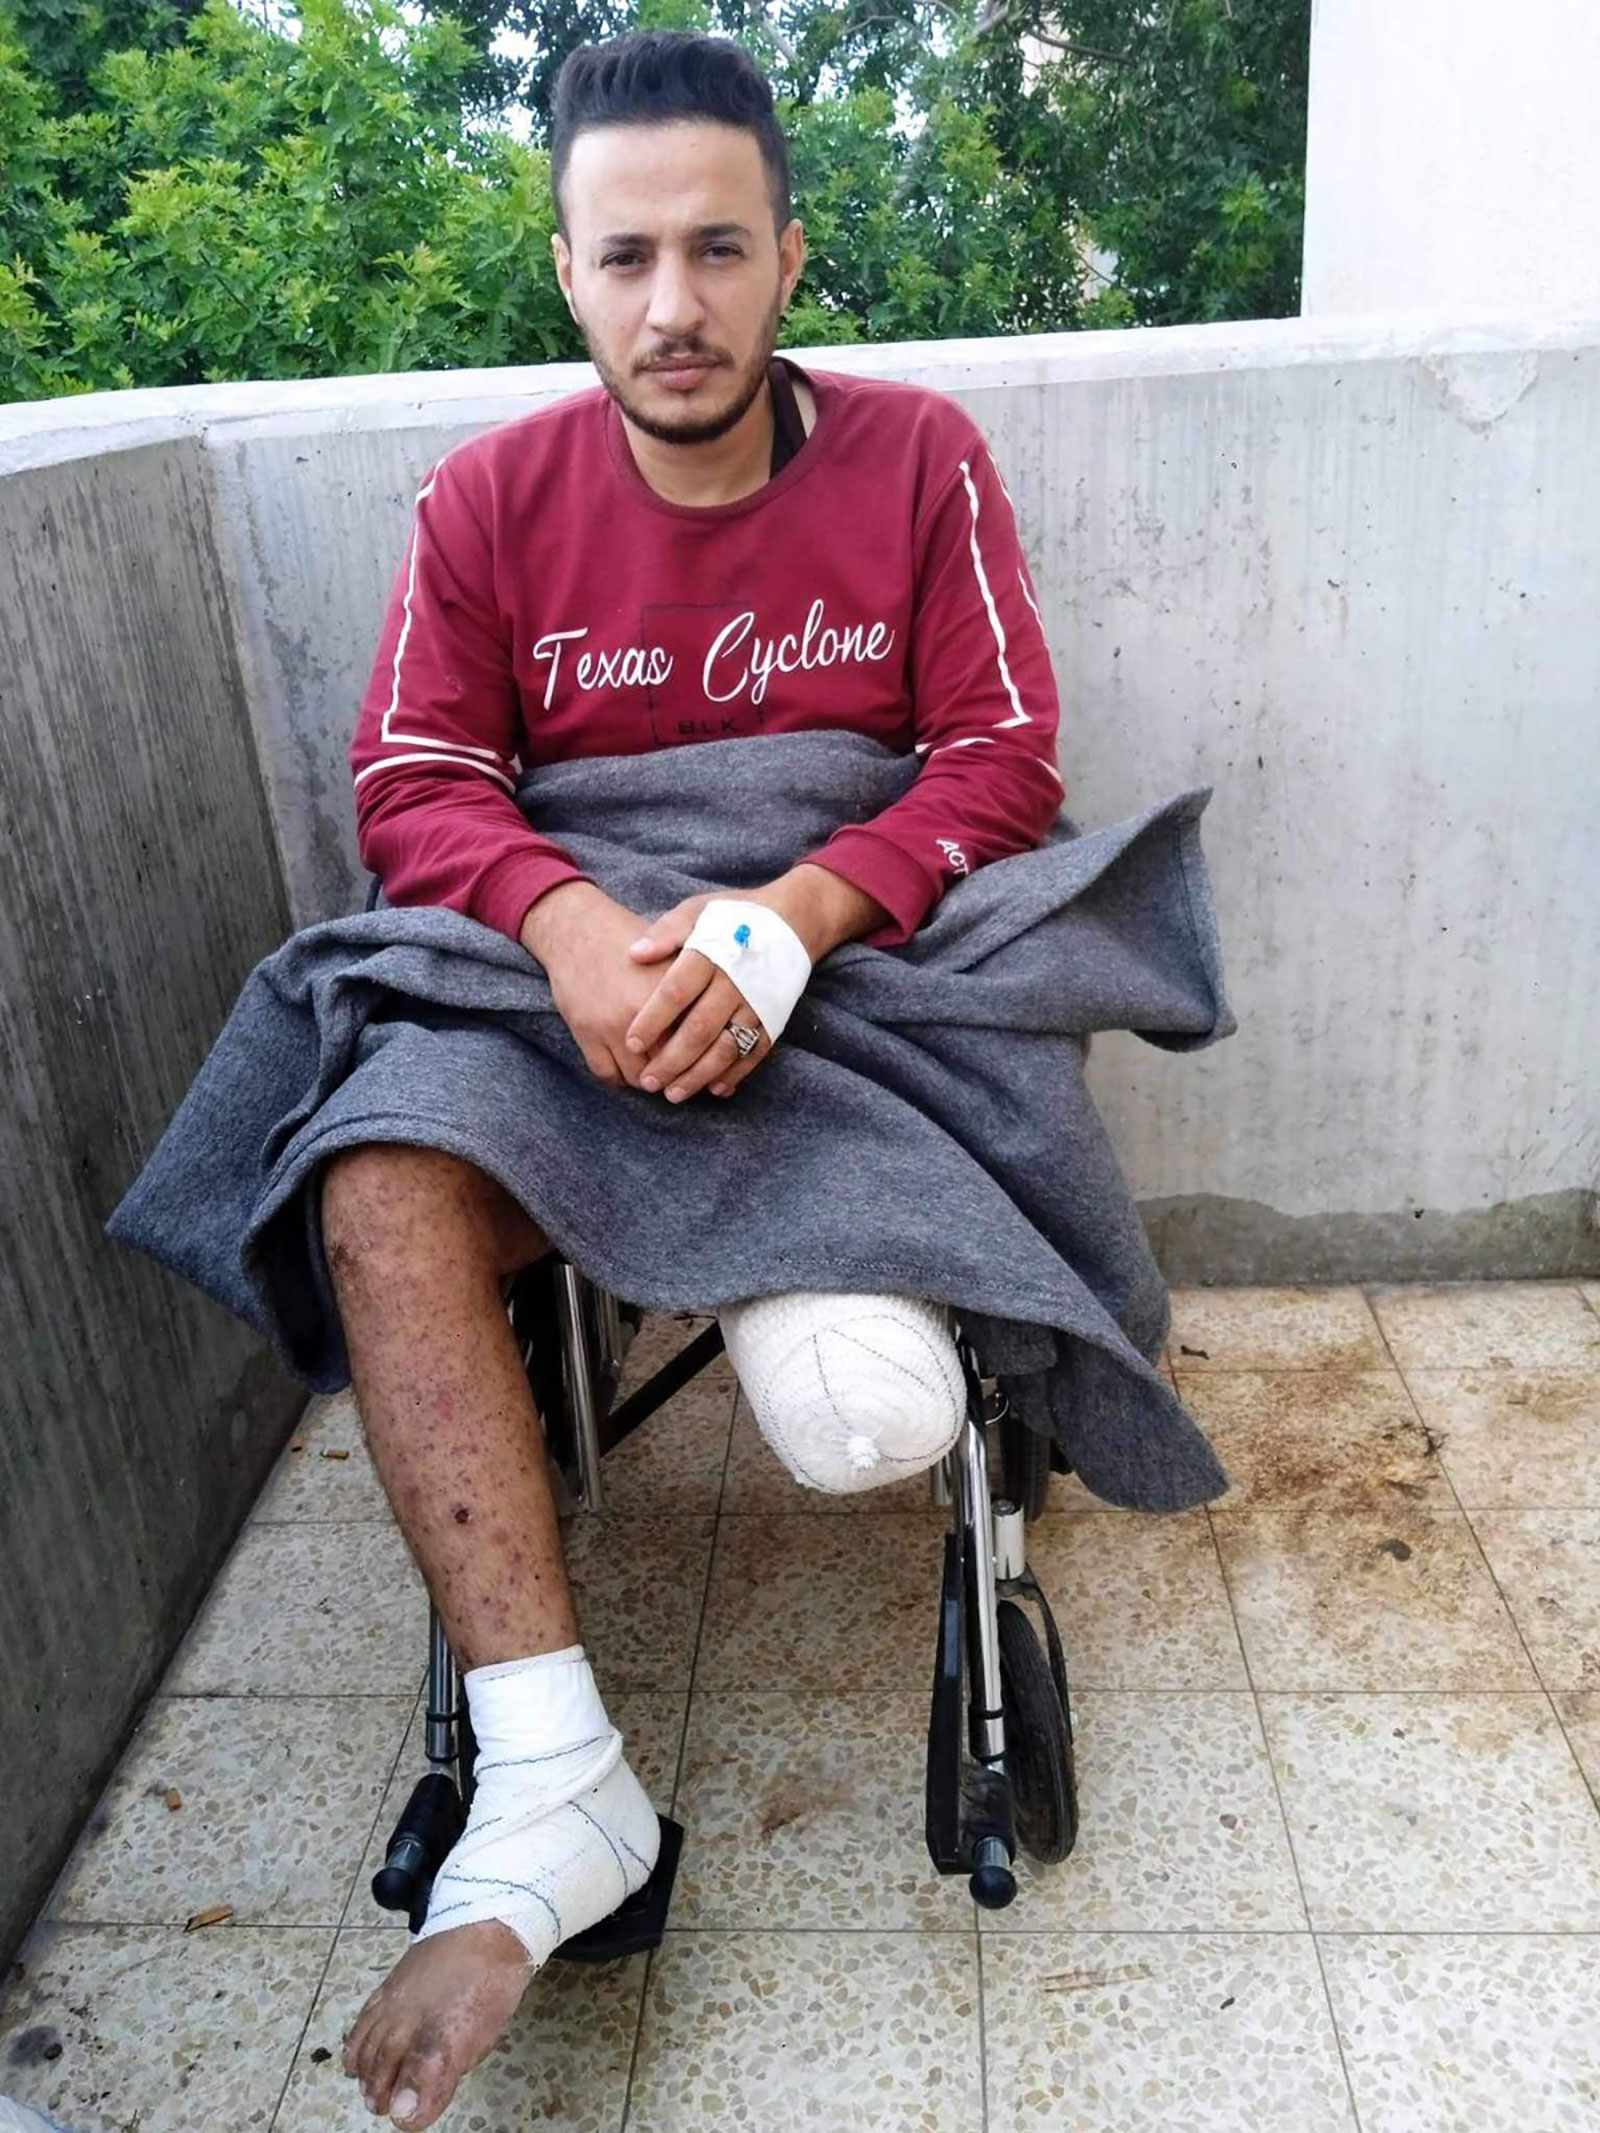 Muhammad Hassan Abu Watfa in Khan Younis, Gaza, last month. He was severely wounded by a strike while trying to buy bread in the Sheikh Radwan neighborhood, in northern Gaza, on October 16. His right foot was amputated twice.